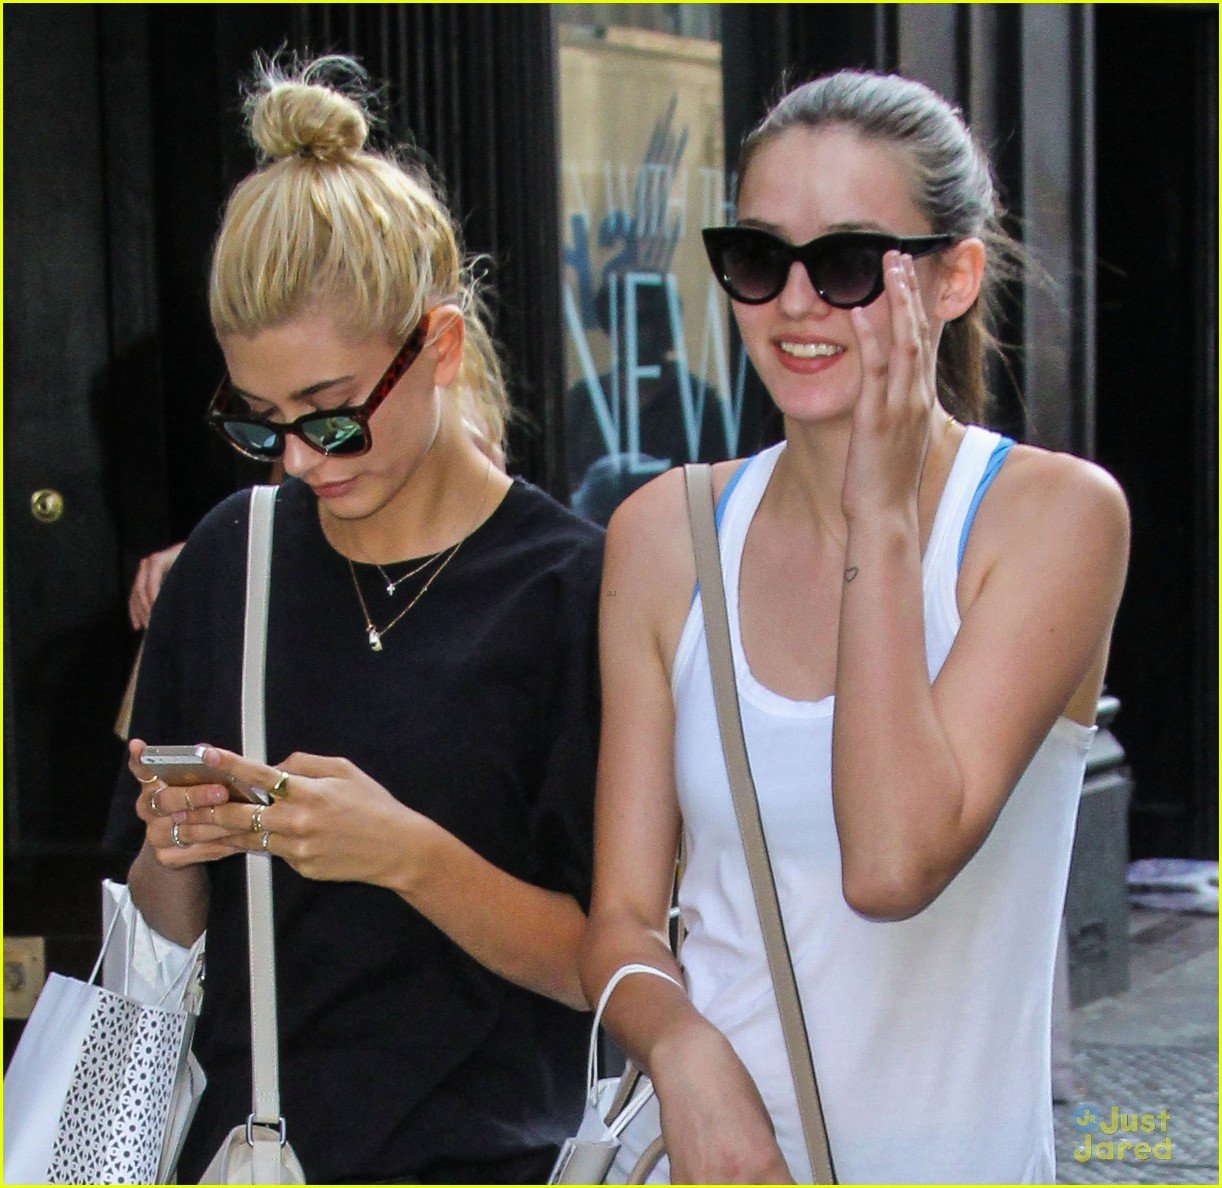 Hailey Baldwin Hits Topshop with Sister Alaia Before Spending Late ...